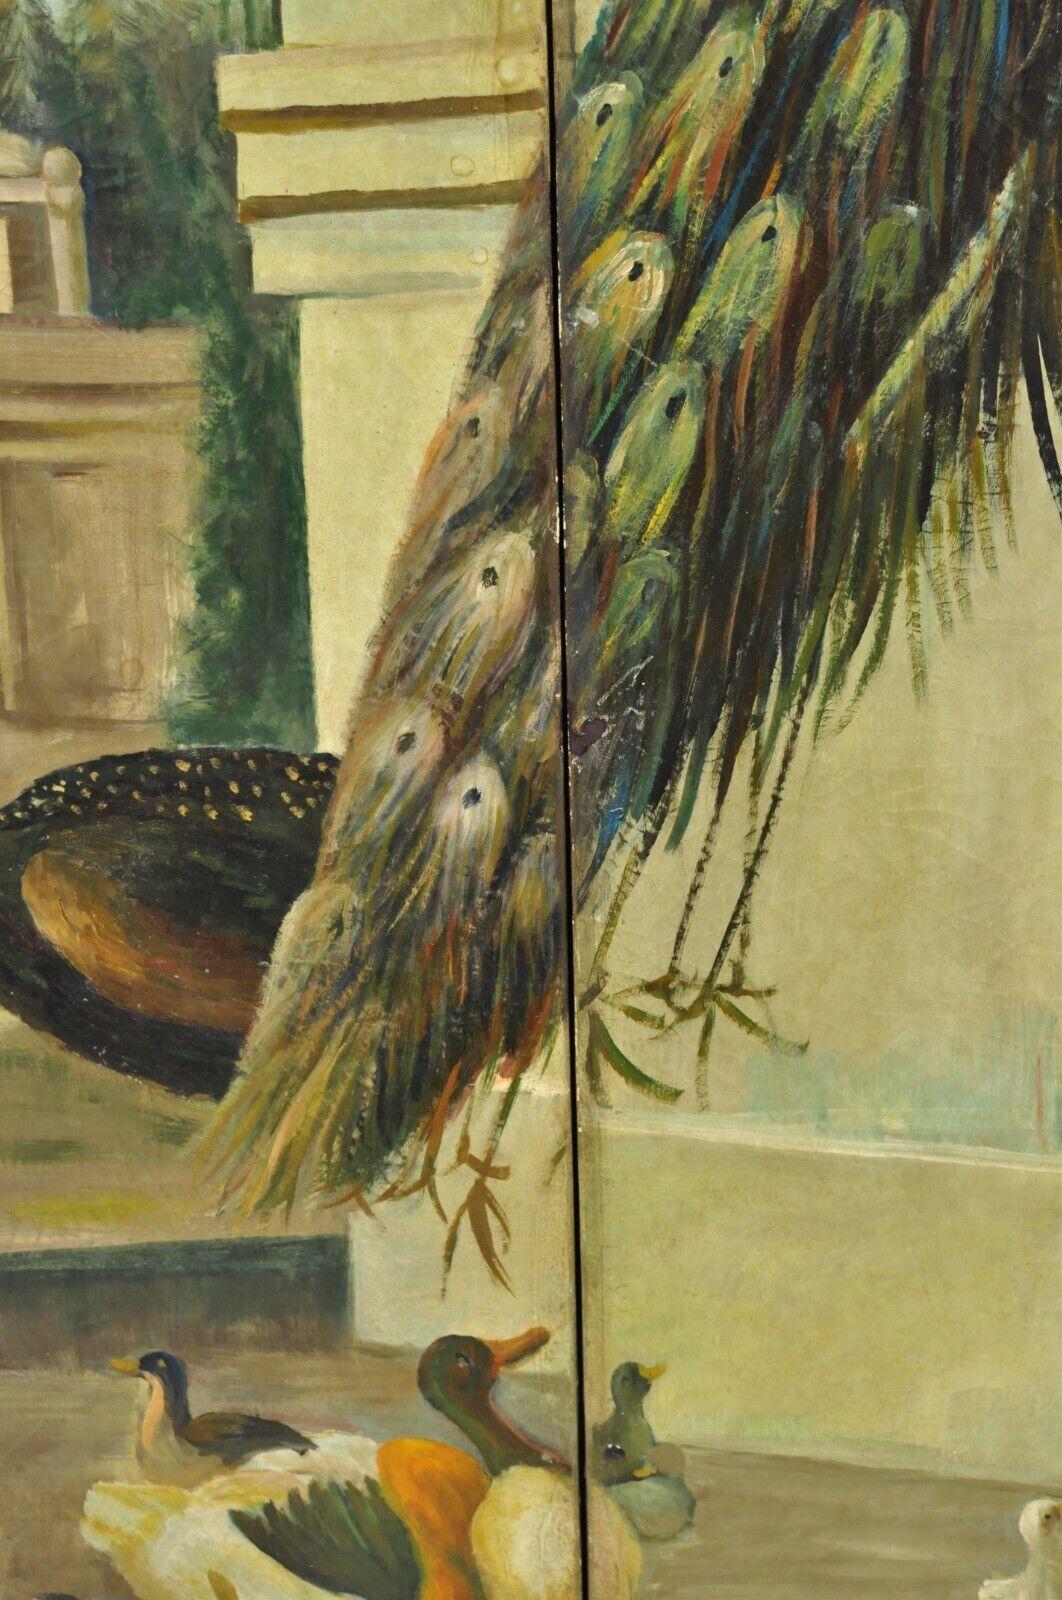 Venetian Hand Painted Oil on Canvas 4 Section Peacock Bird Screen Room Divider For Sale 2